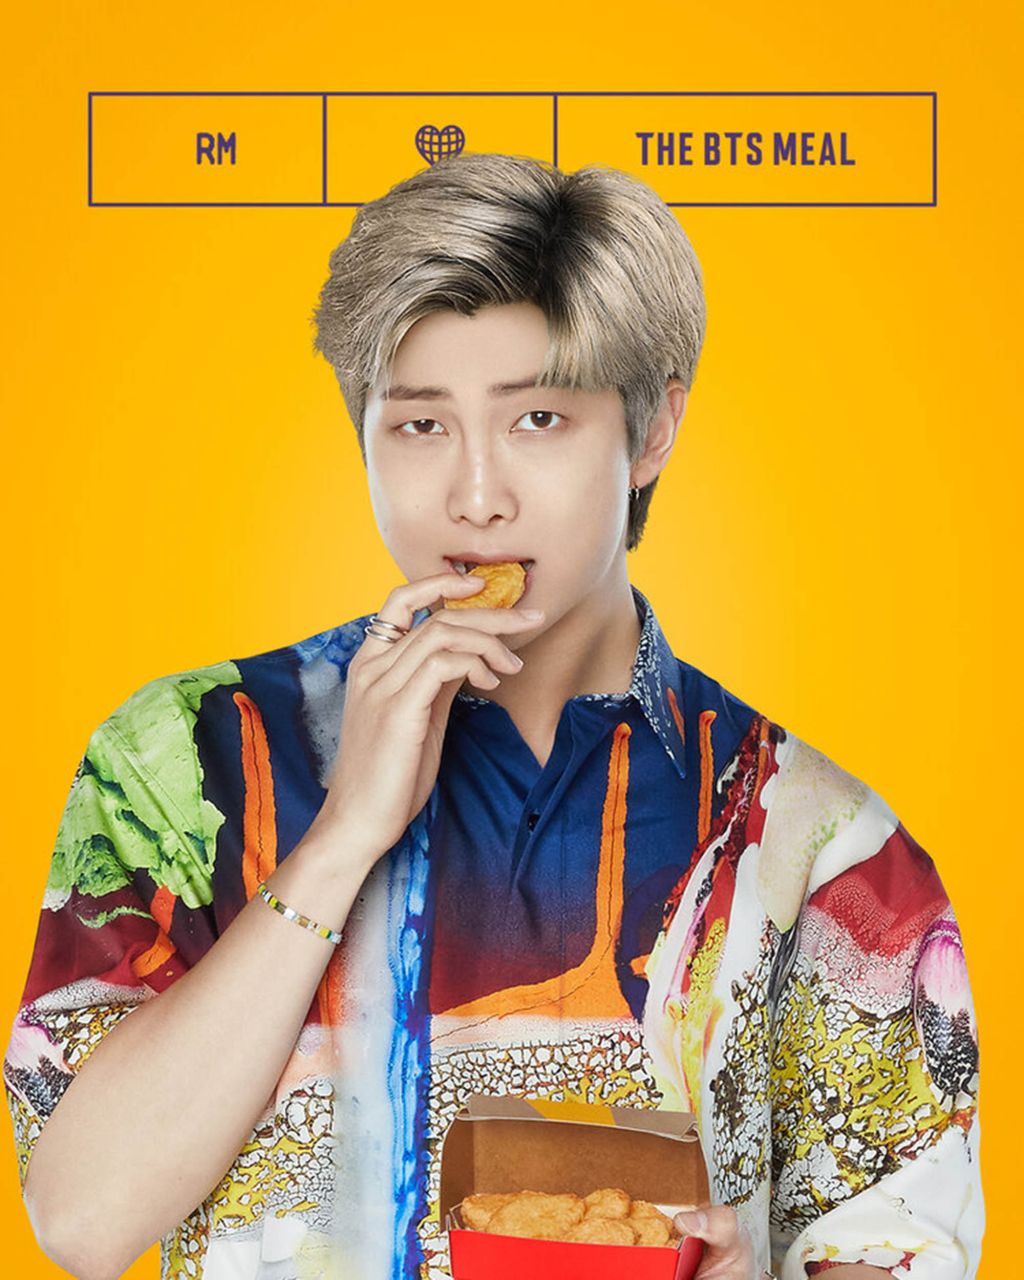 Here's what the BTS McDonald's meal comes with